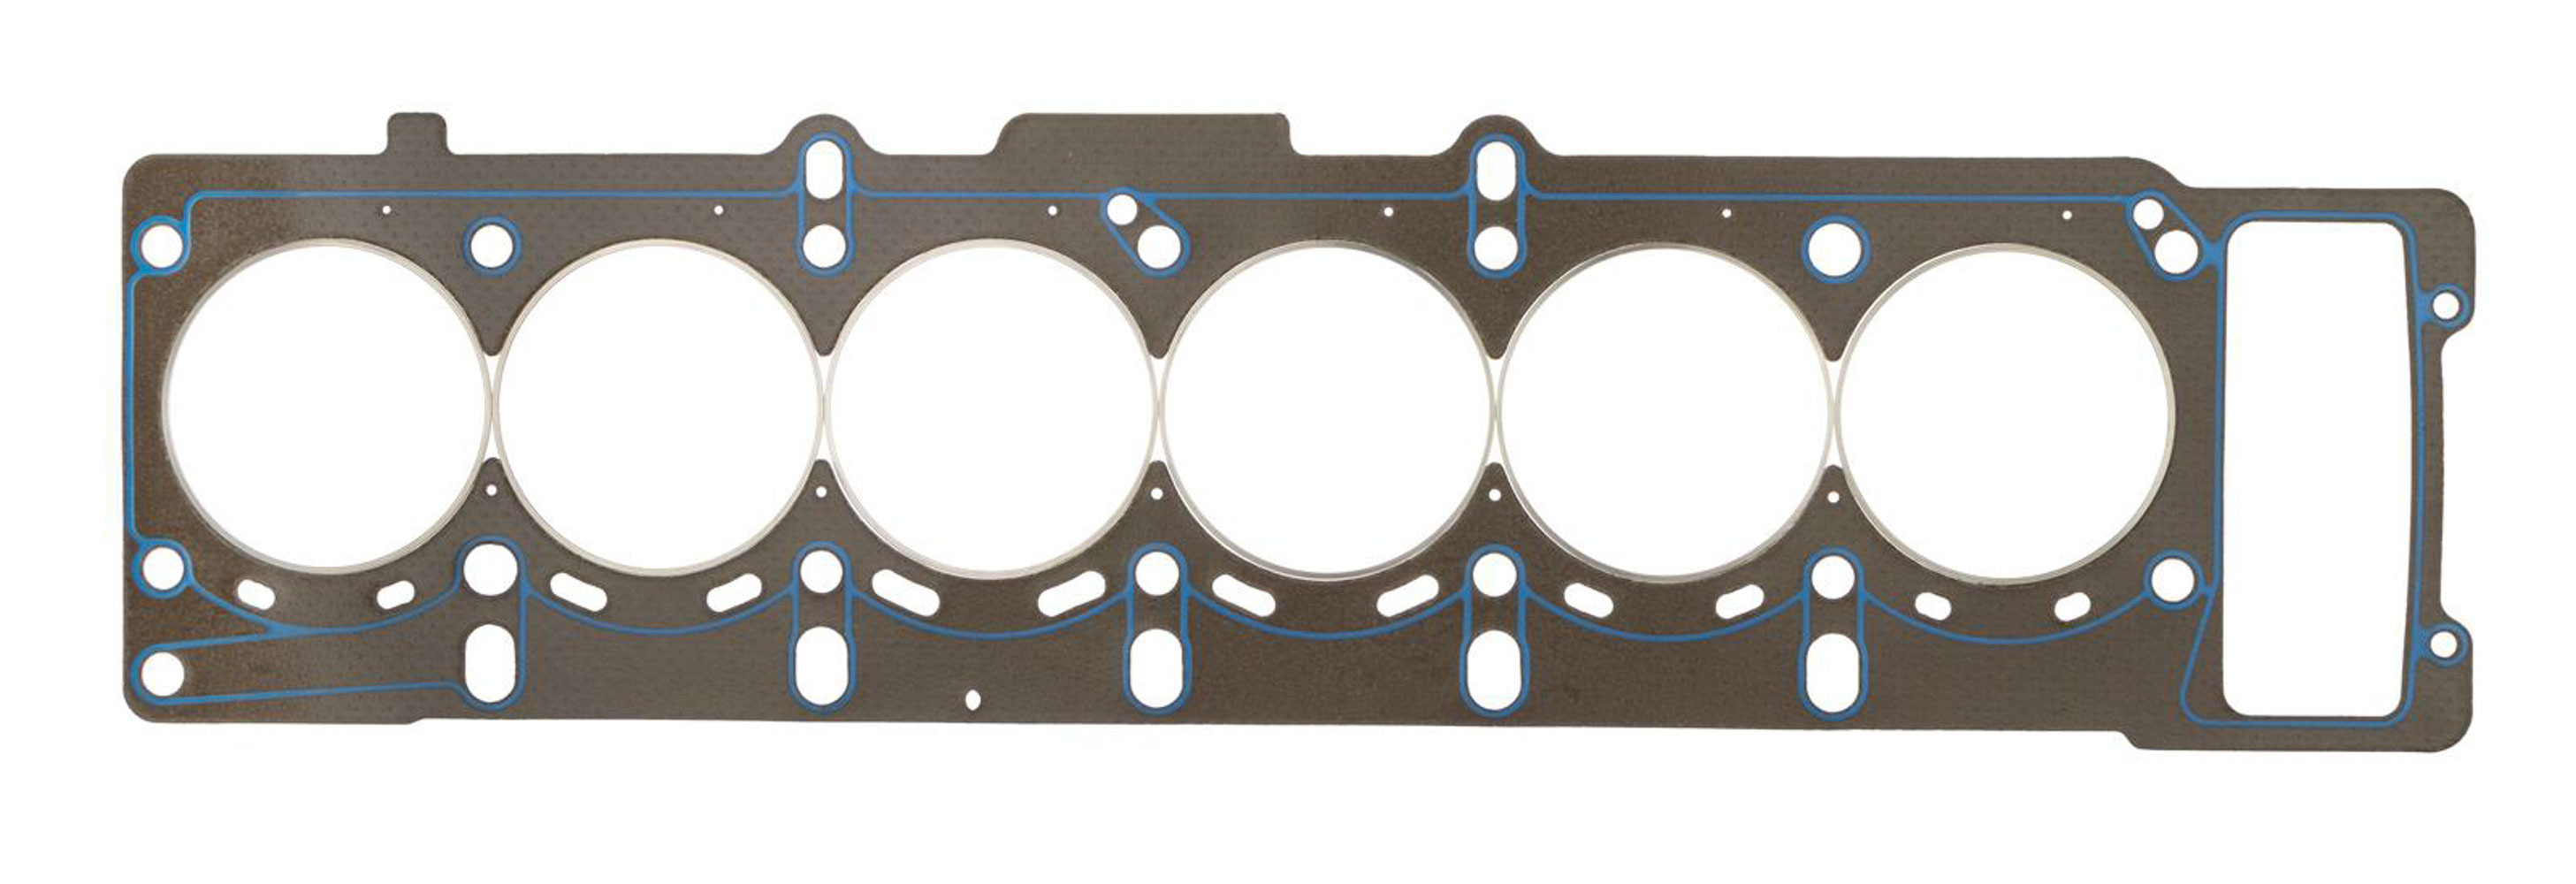 SCE Gaskets CR330037 - Cylinder Head Gasket, Vulcan Cut Ring, 87.50 mm Bore, 1.20 mm Compression Thickness, Steel Core Laminate, BMW Inline-6, Each